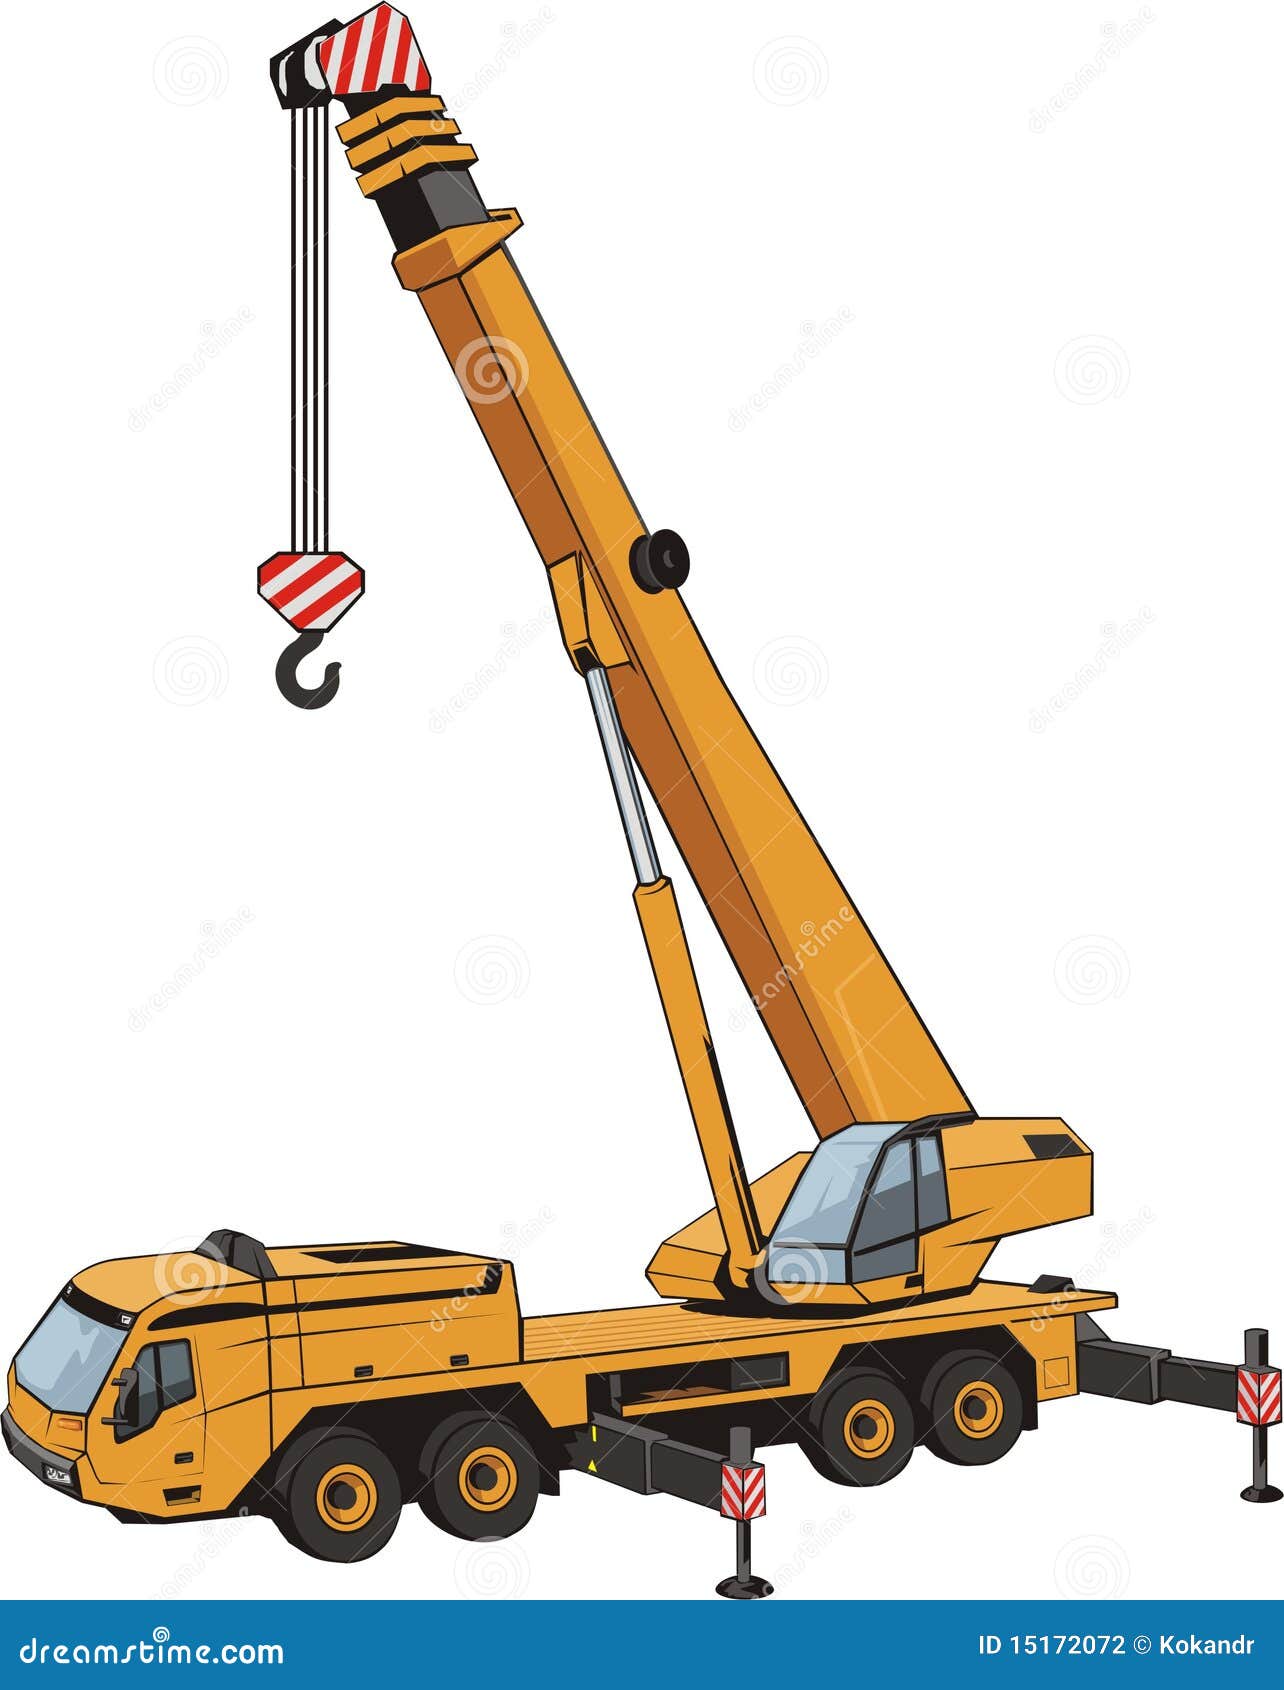 Mobile Crane Vector Images (over 3,600)